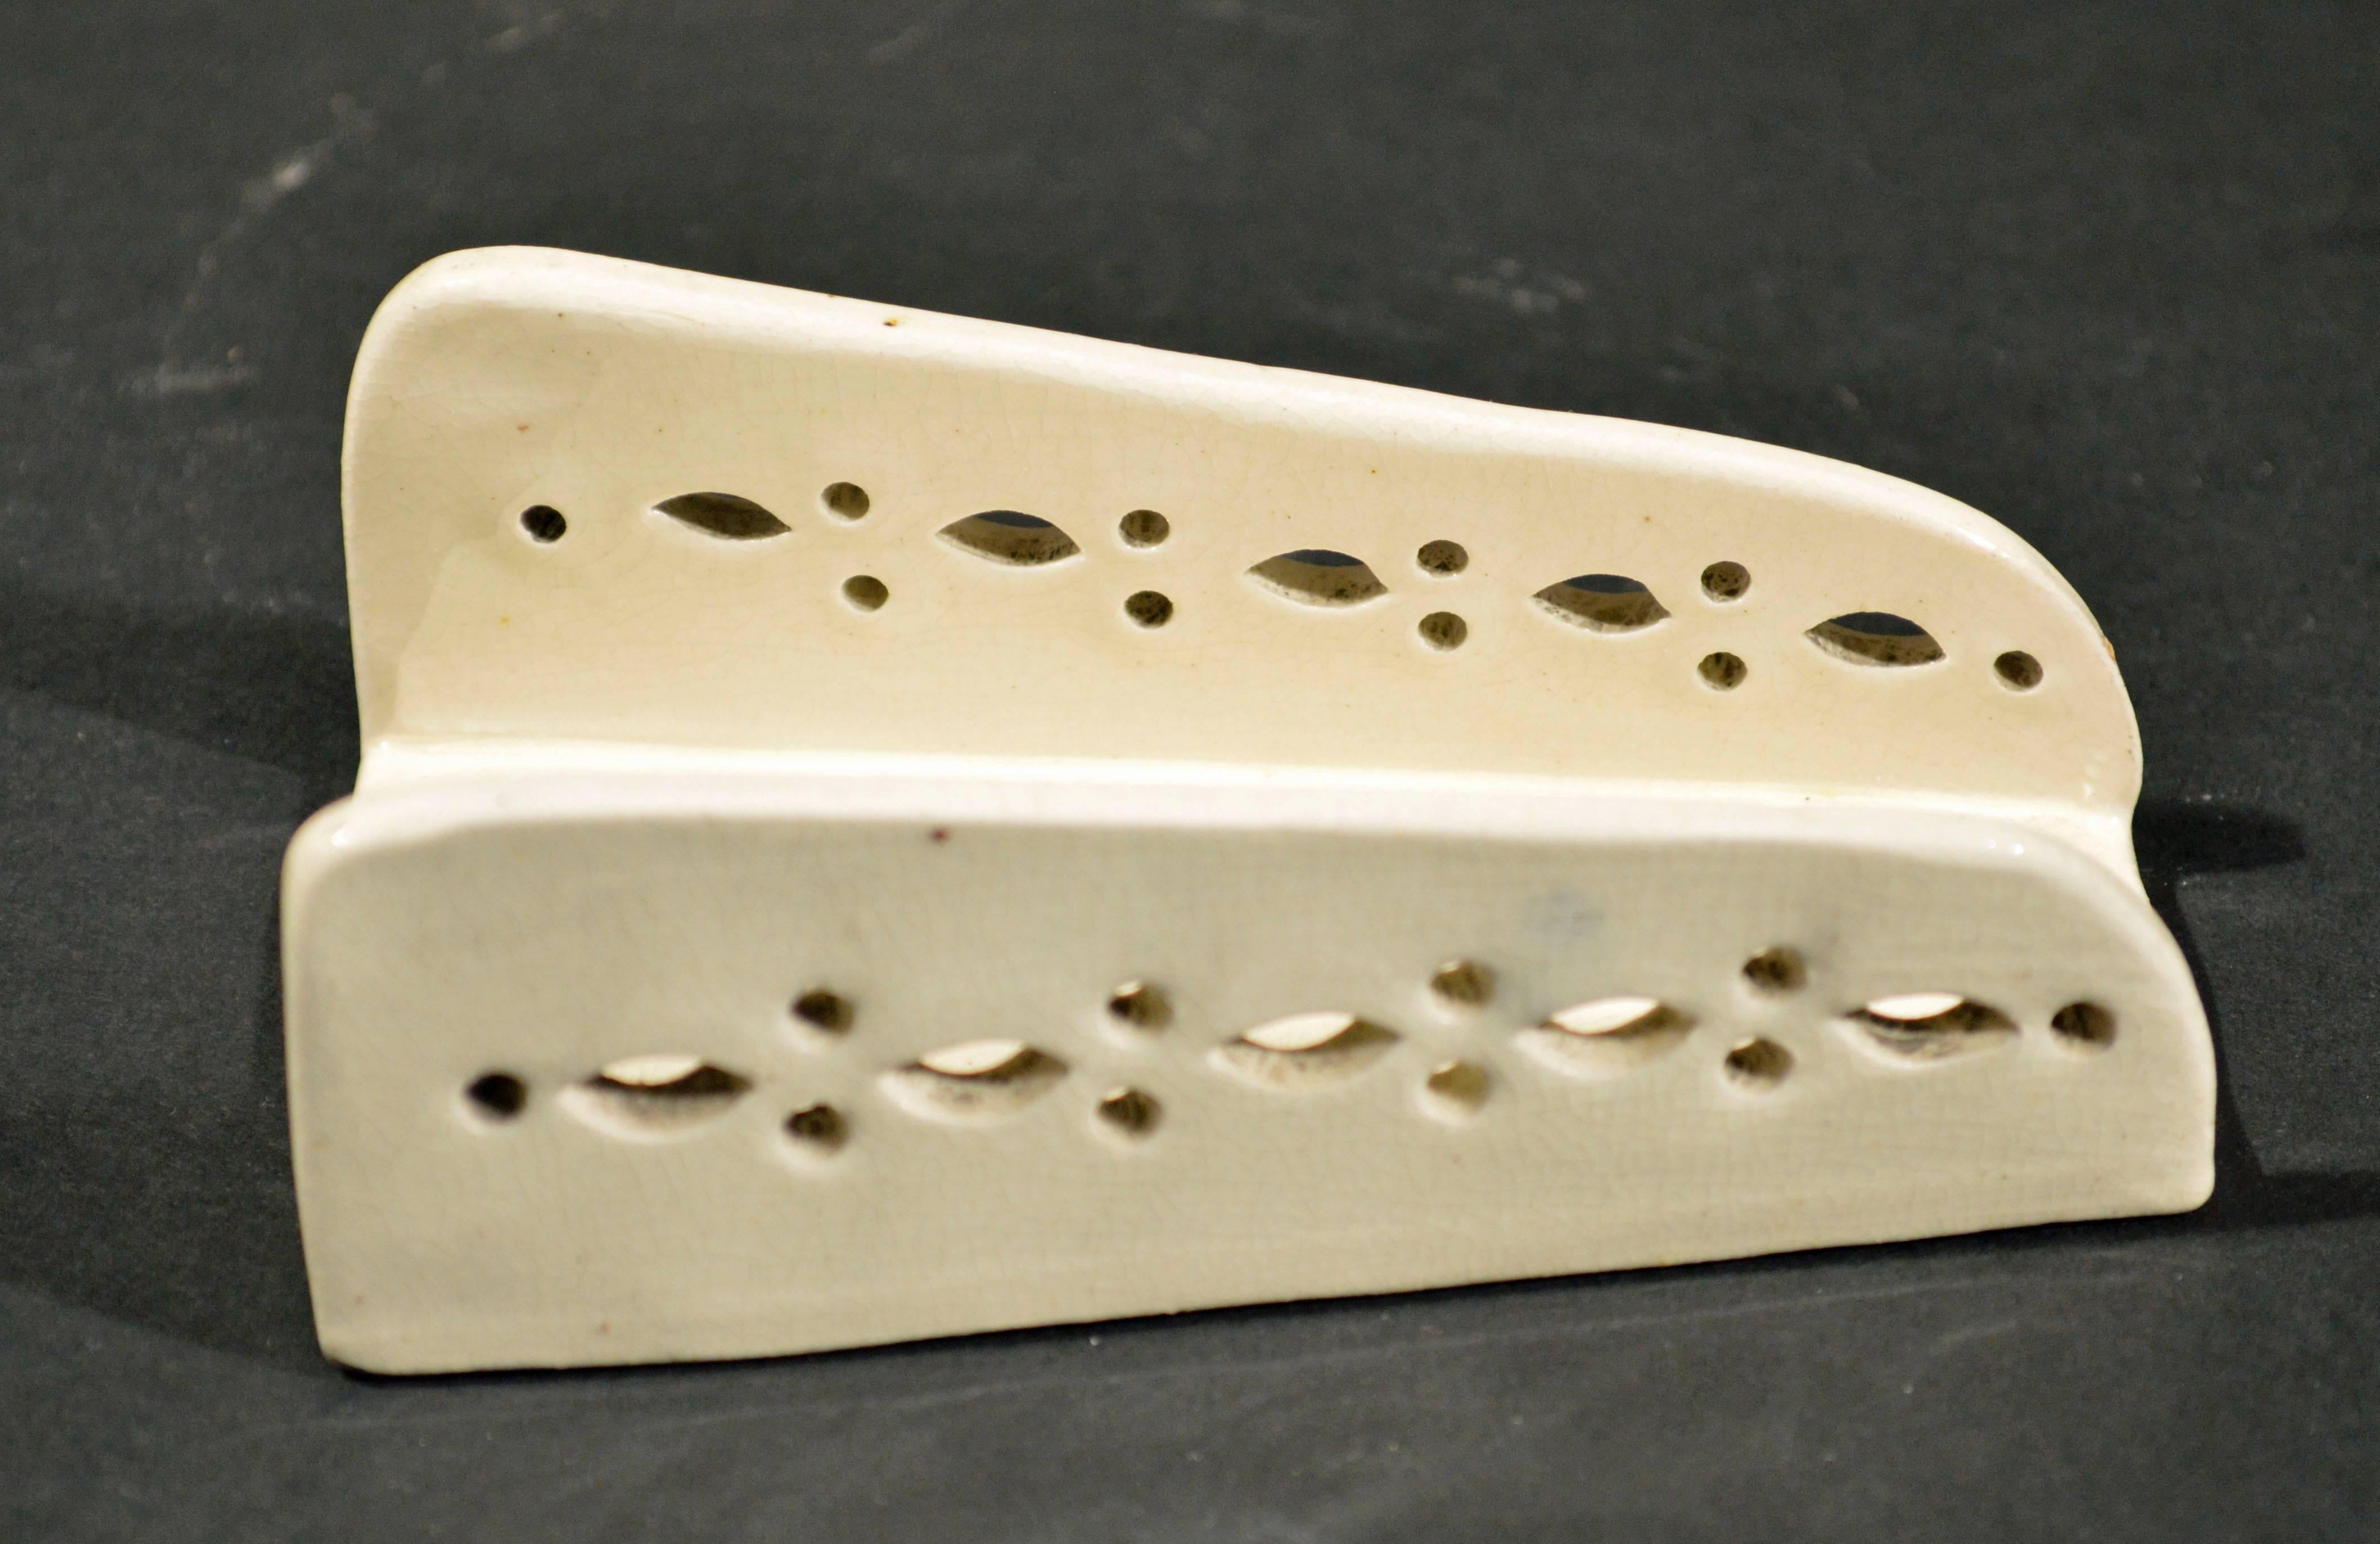 English Creamware Set of Four Asparagus Servers or Shells, 
circa 1780-1800.

The four creamware openwork holders are formed like a channel with rounded edges and a flat base, the sides with openwork in the form of stylized flower-heads.

These